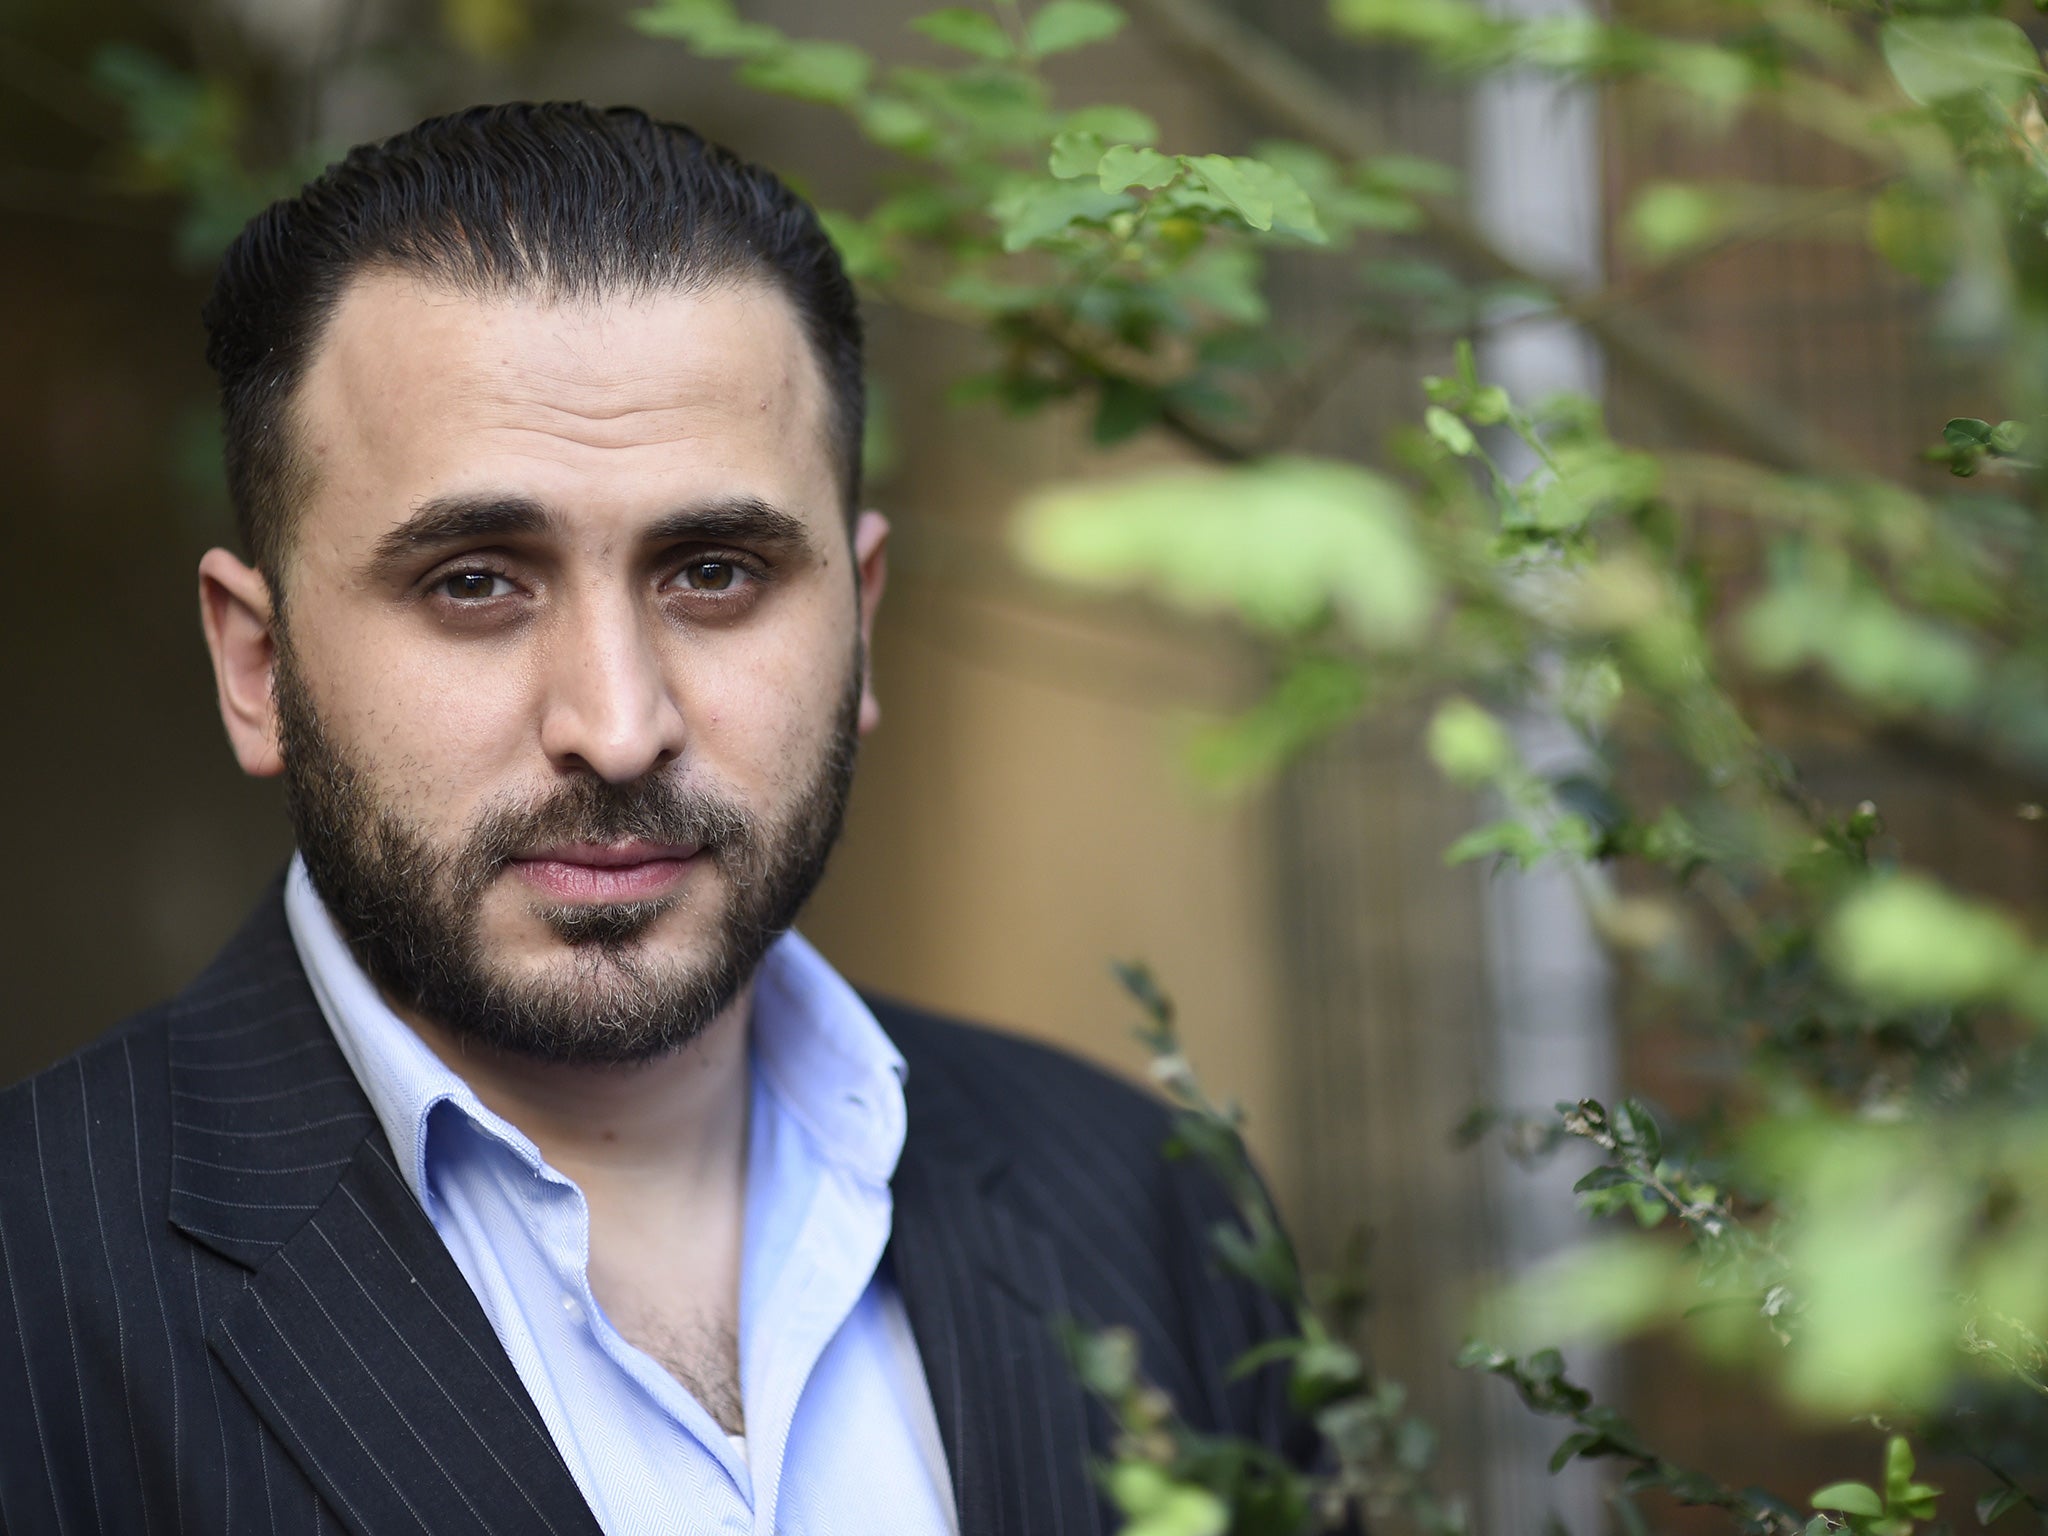 Writer and researcher on radicalism and extremism, Montasser-al-De’emeh